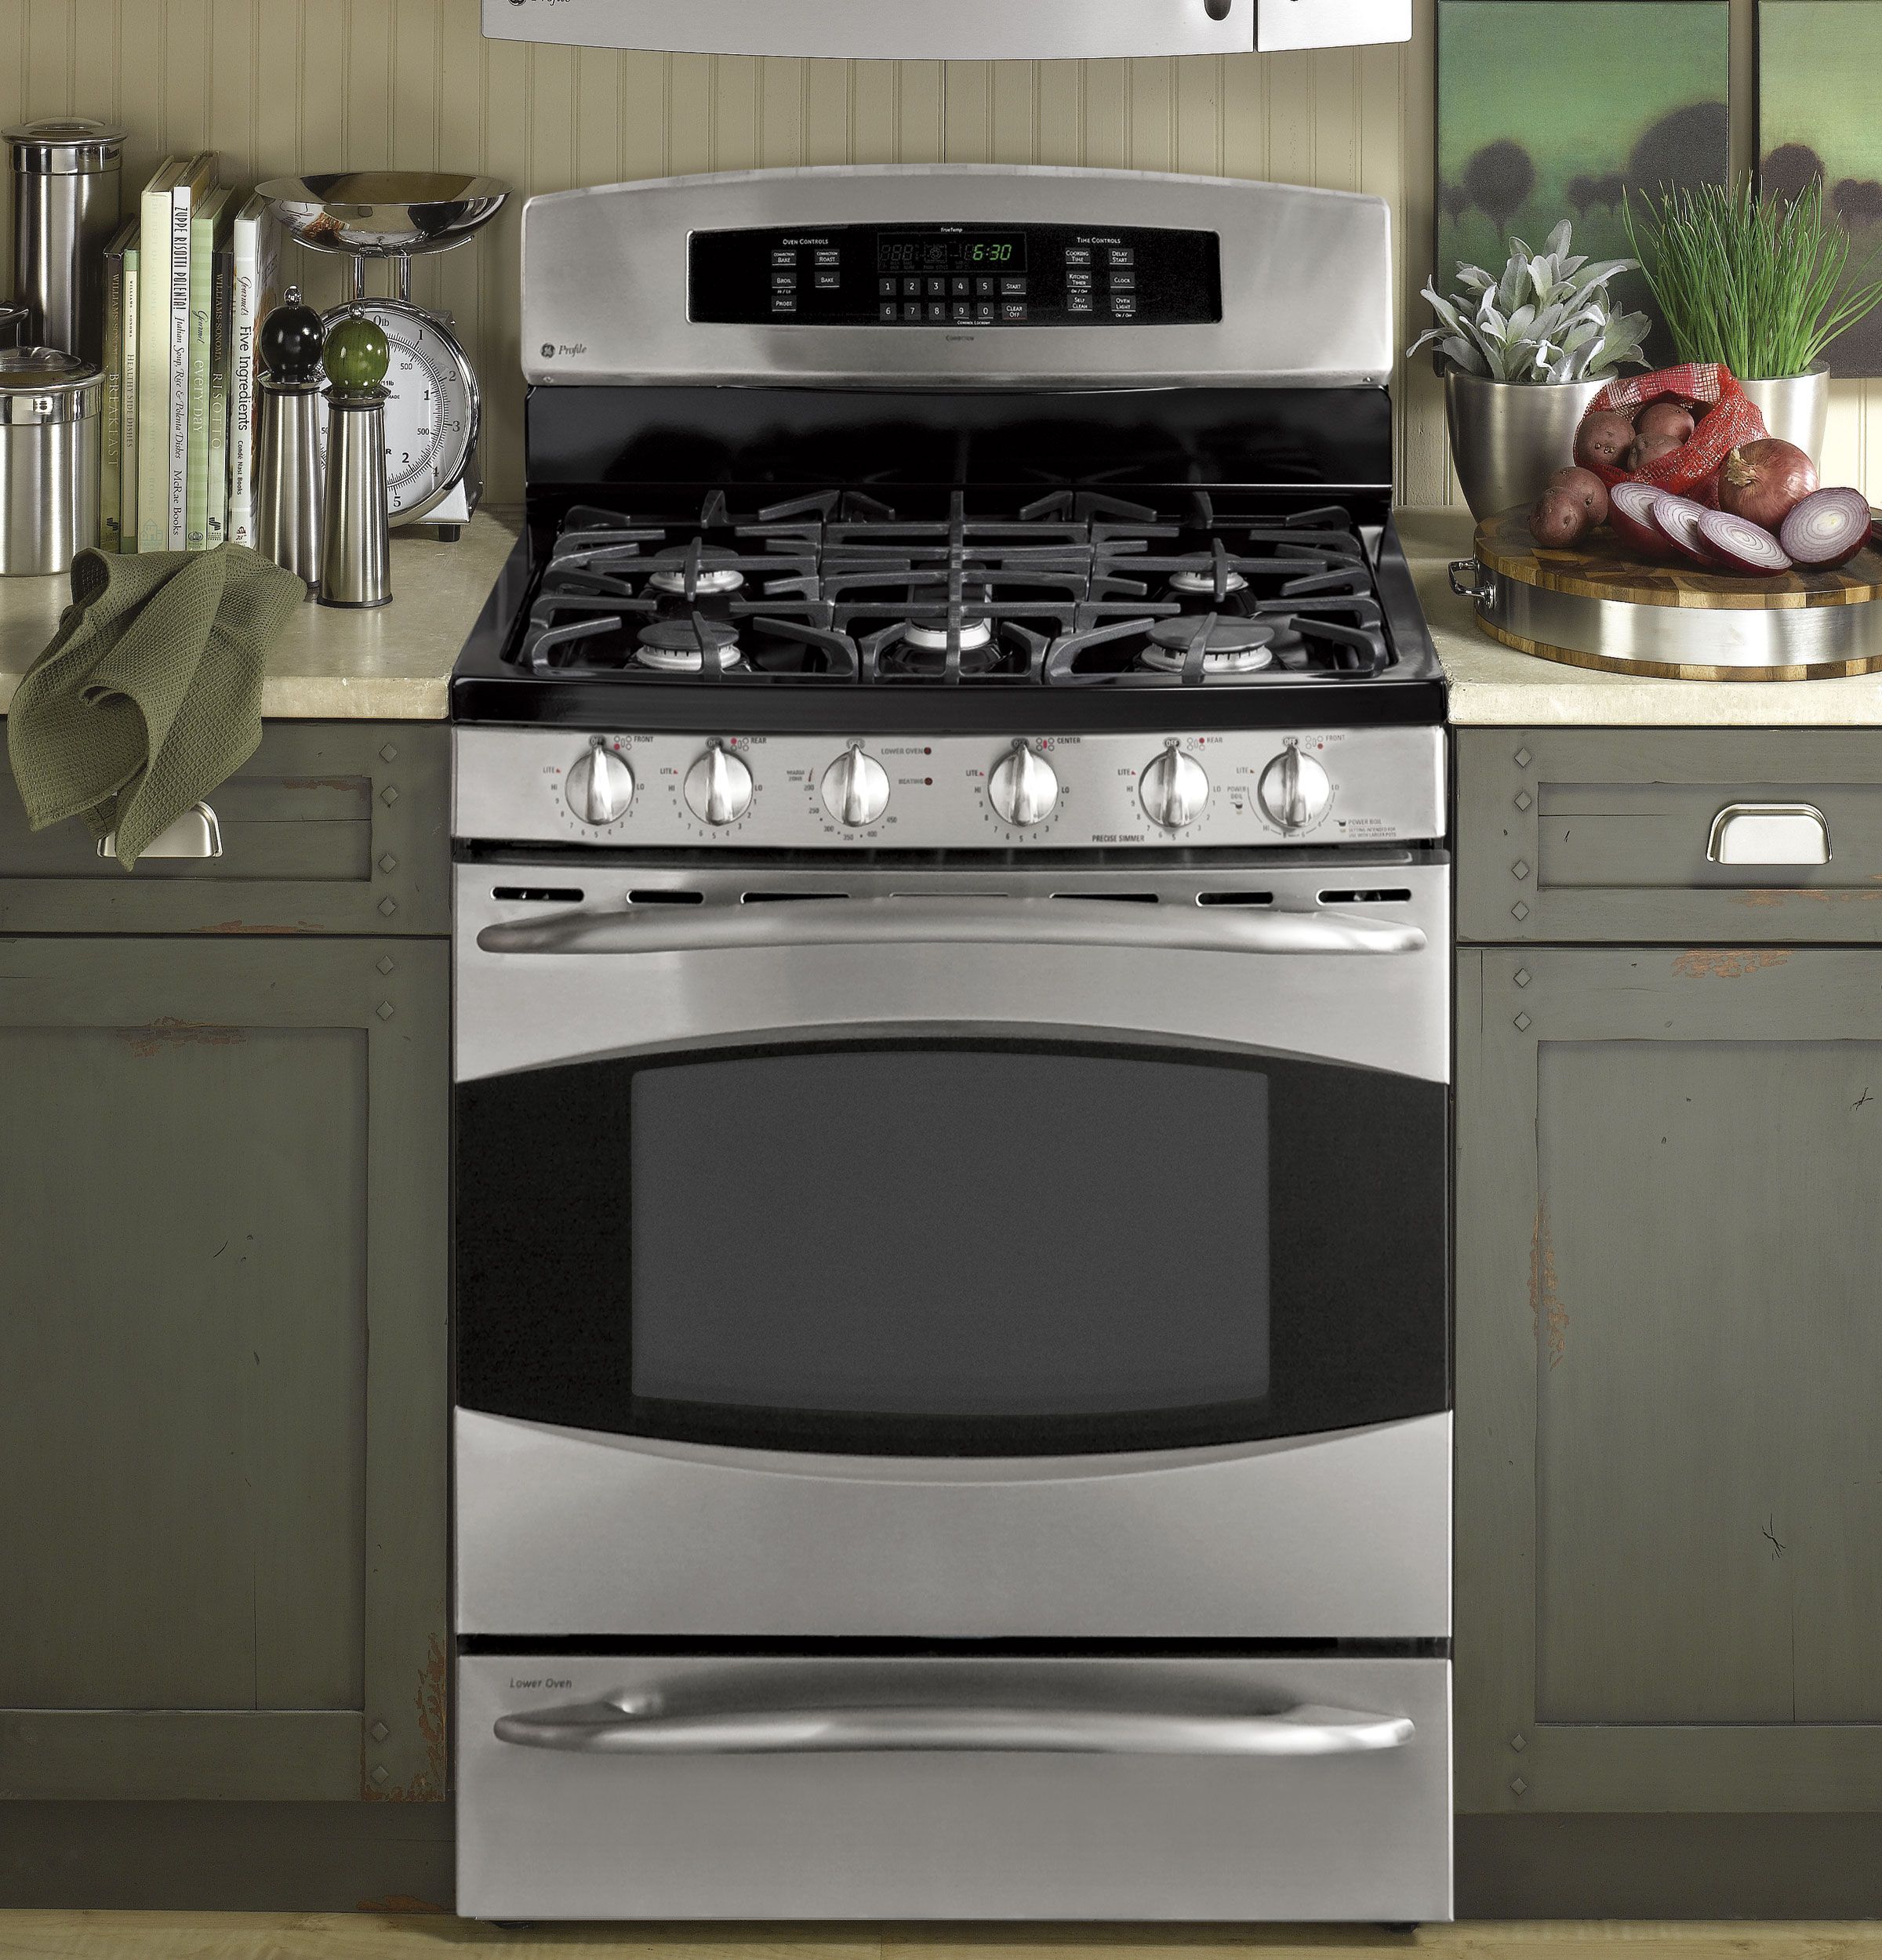 Appliance Mistakes When Remodeling Your Kitchen